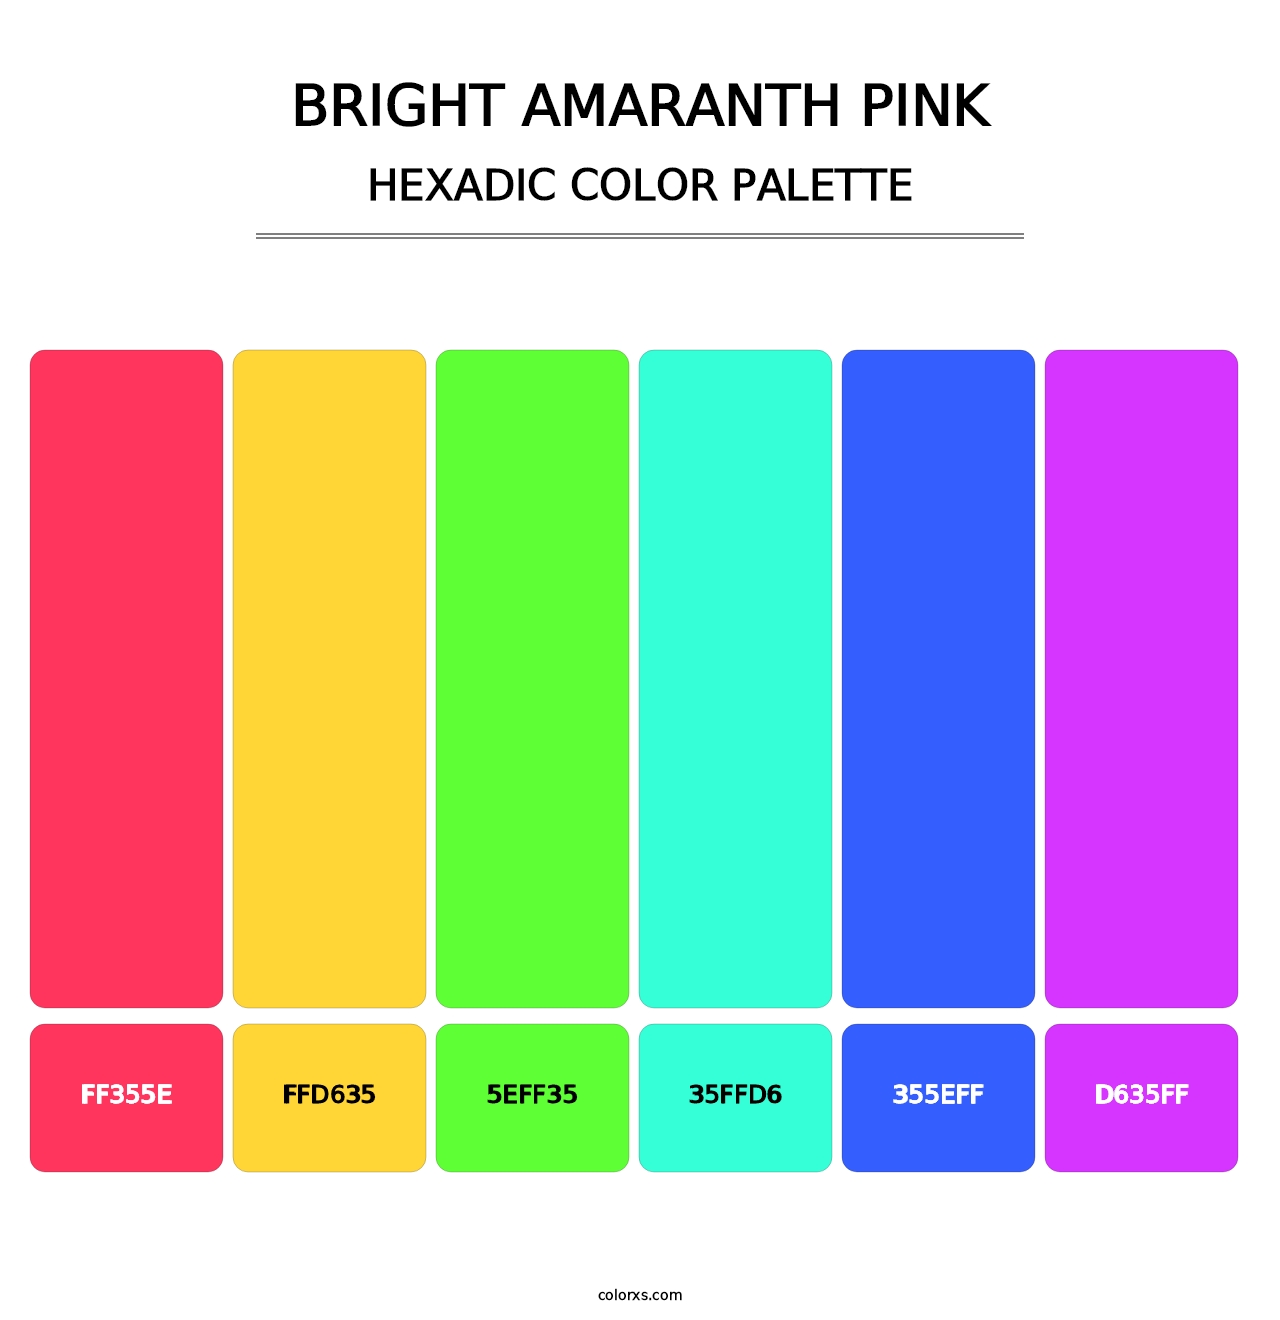 Bright Amaranth Pink - Hexadic Color Palette